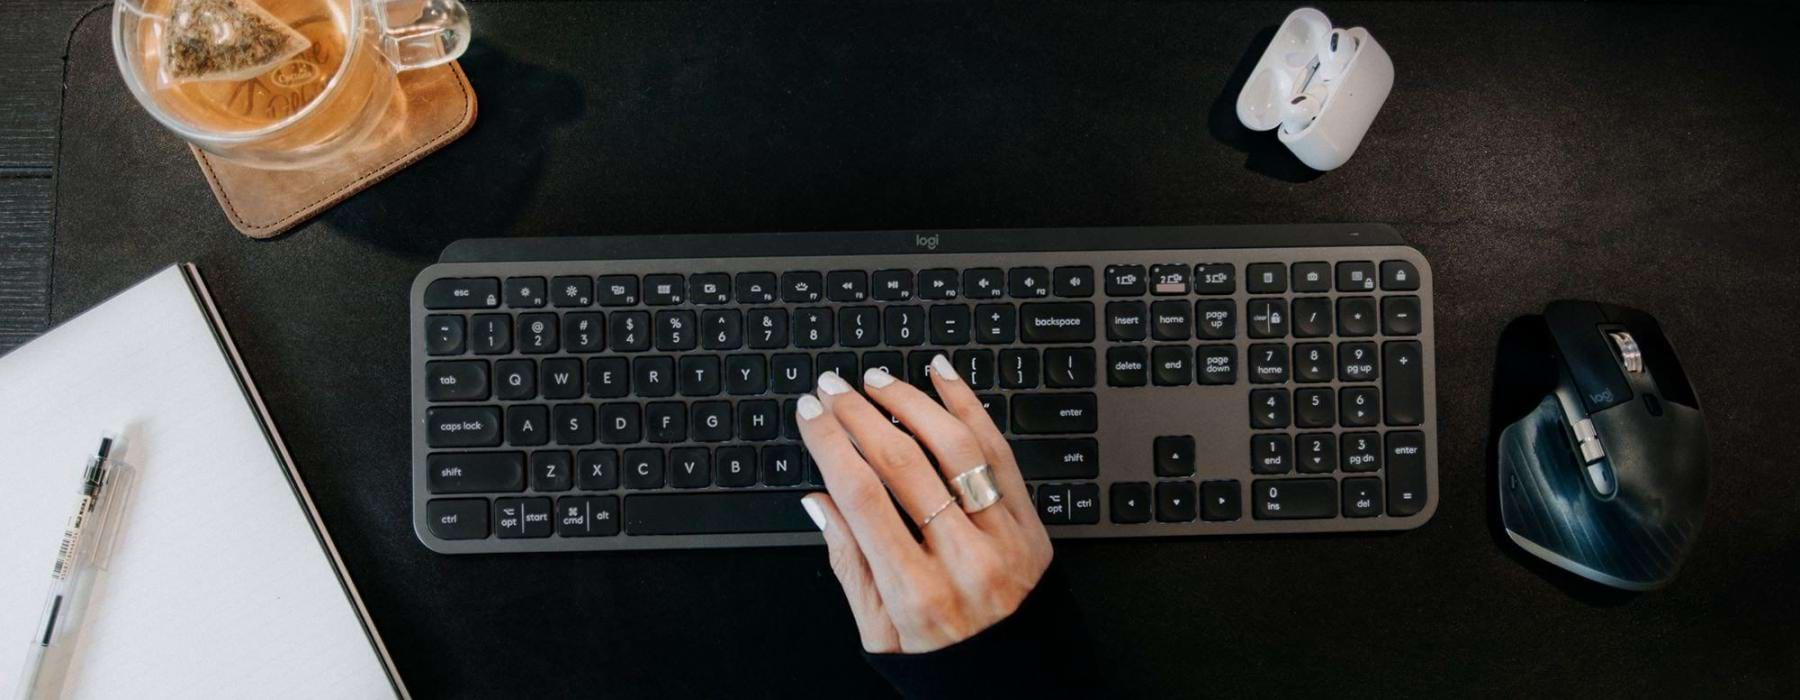 woman's hand on a keyboard surrounded by office items and a cup of tea on a coaster